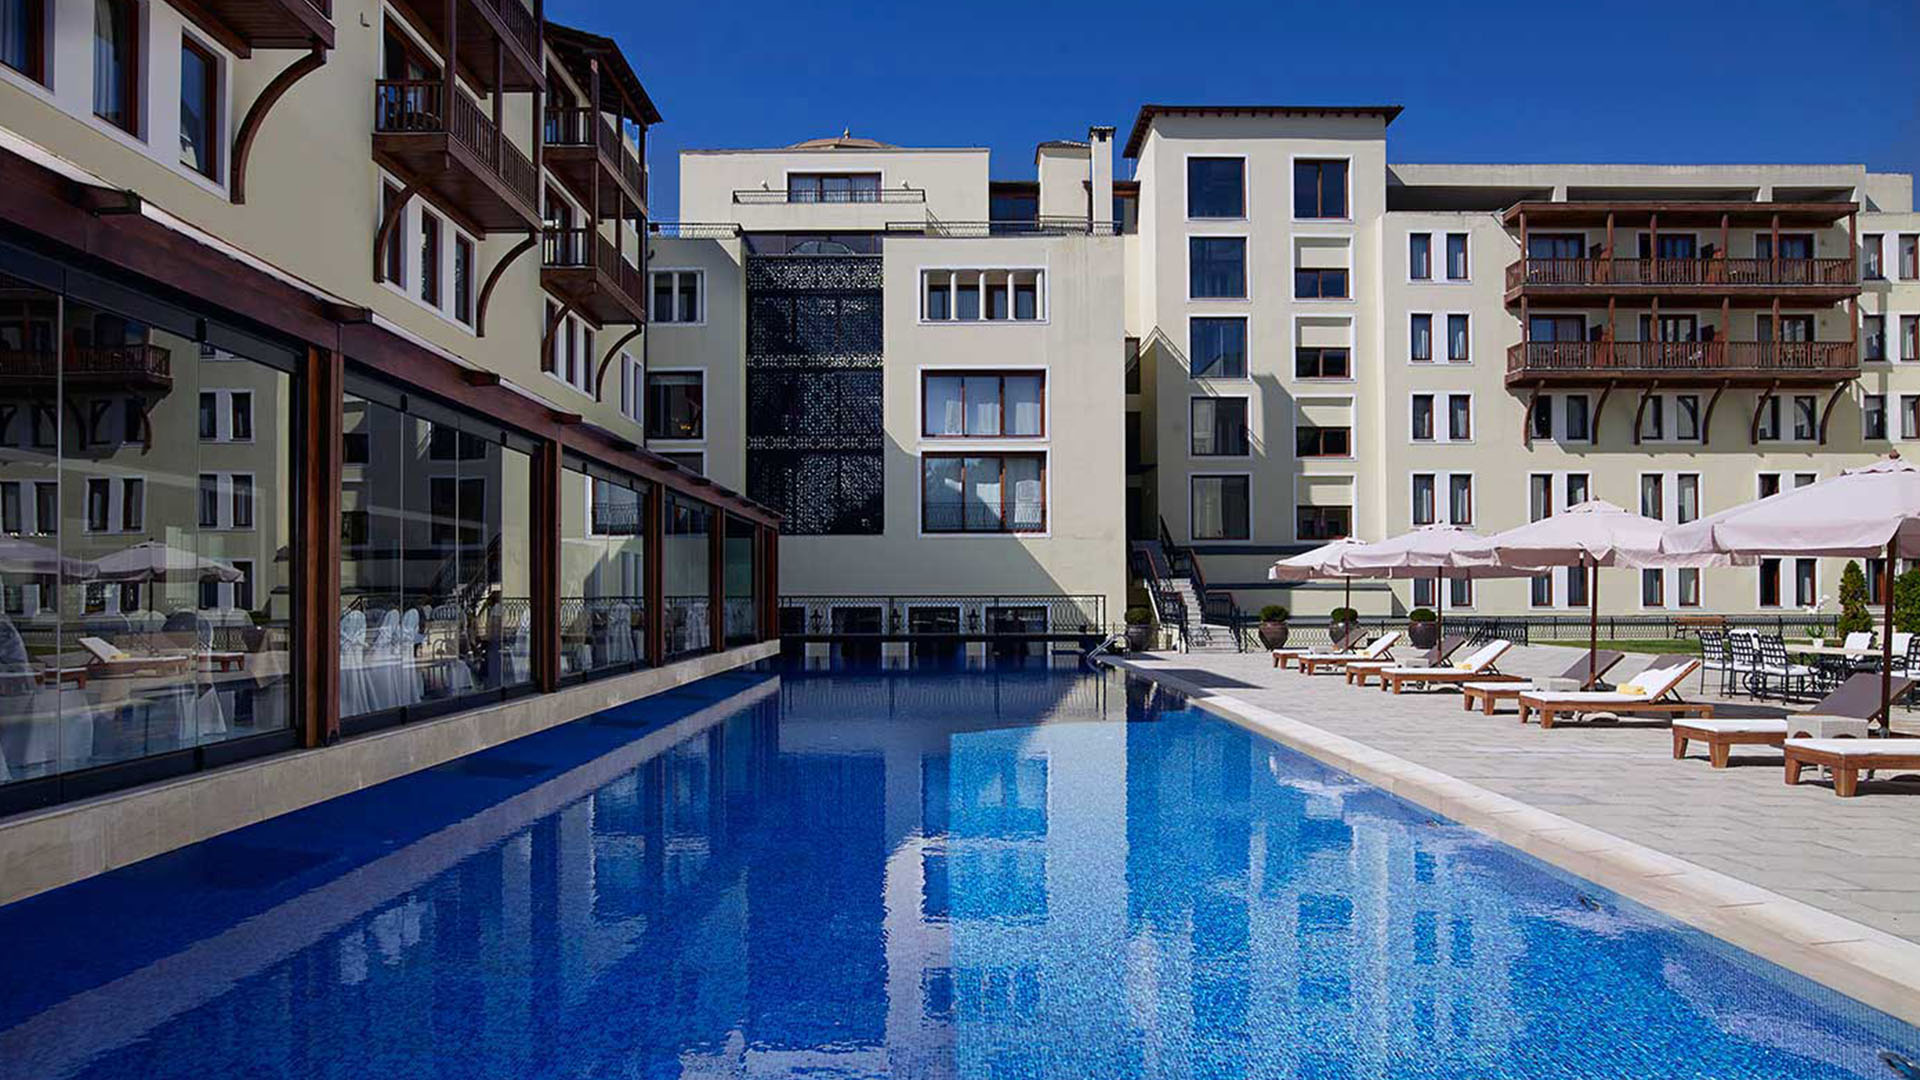 5* Grand Serai Hotel - Ιωάννινα ✦ -50% ✦ 4 Ημέρες (3 Διανυκτερεύσεις) ✦ 2 άτομα + 2 παιδιά έως 4 ετών ✦ 8 ✦ 01/07/2023 έως 31/08/2023 ✦ Early check in και Late check out κατόπιν διαθεσιμότητας!